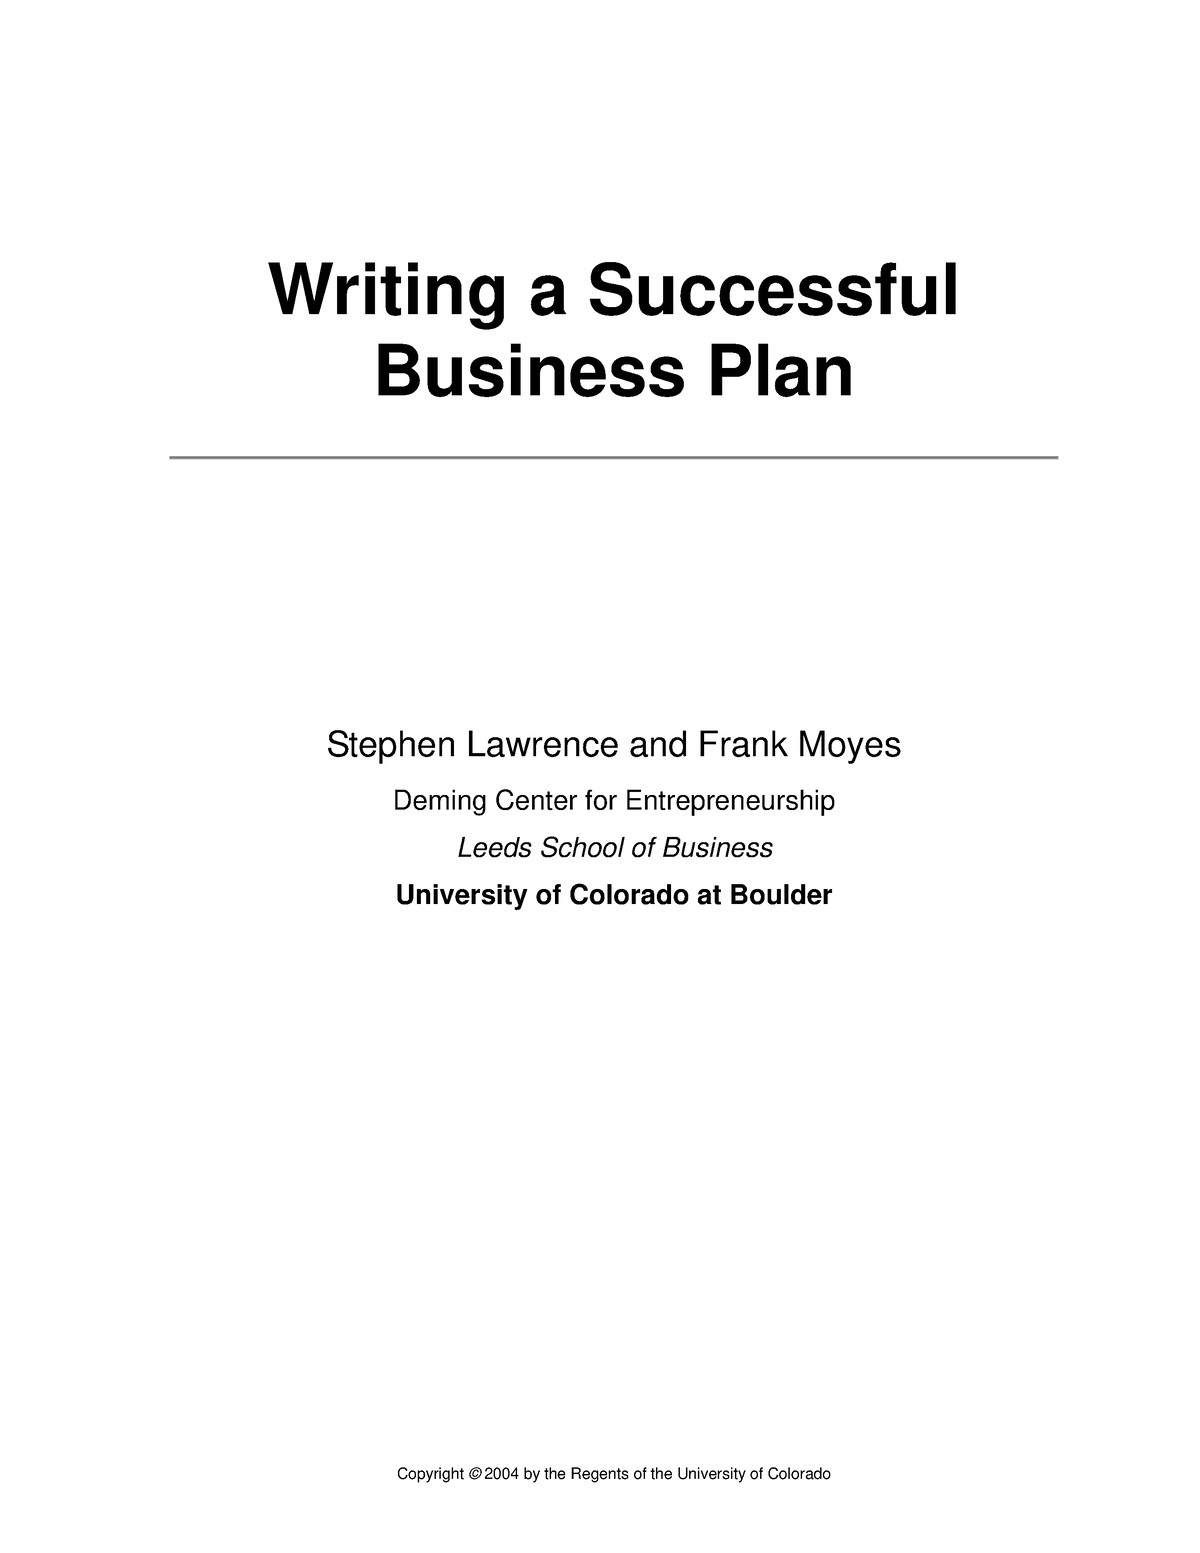 mba project business plan